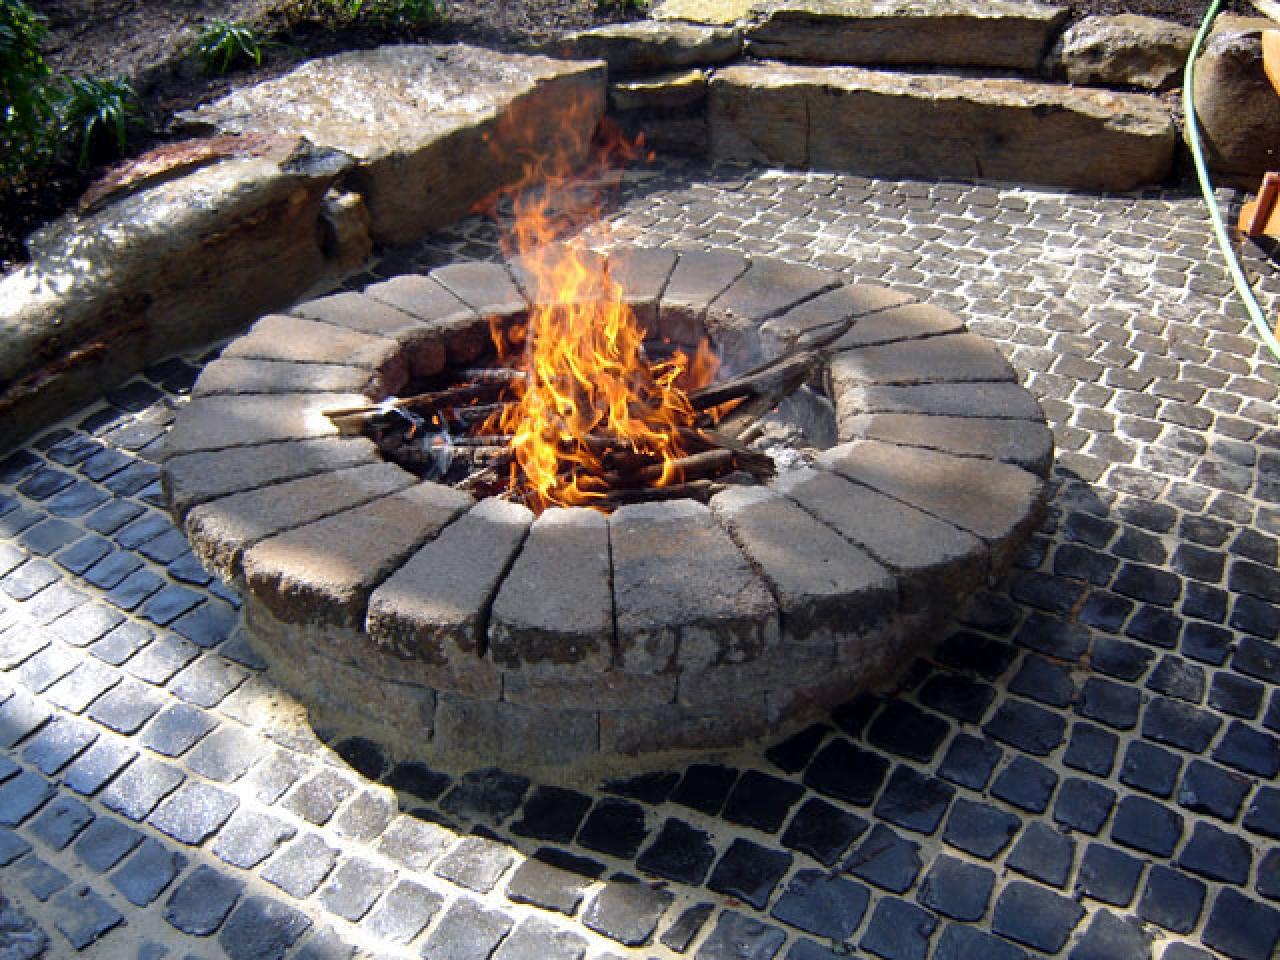 How To Build A Round Stone Fire Pit, Diy Gas Fire Pit Instructions